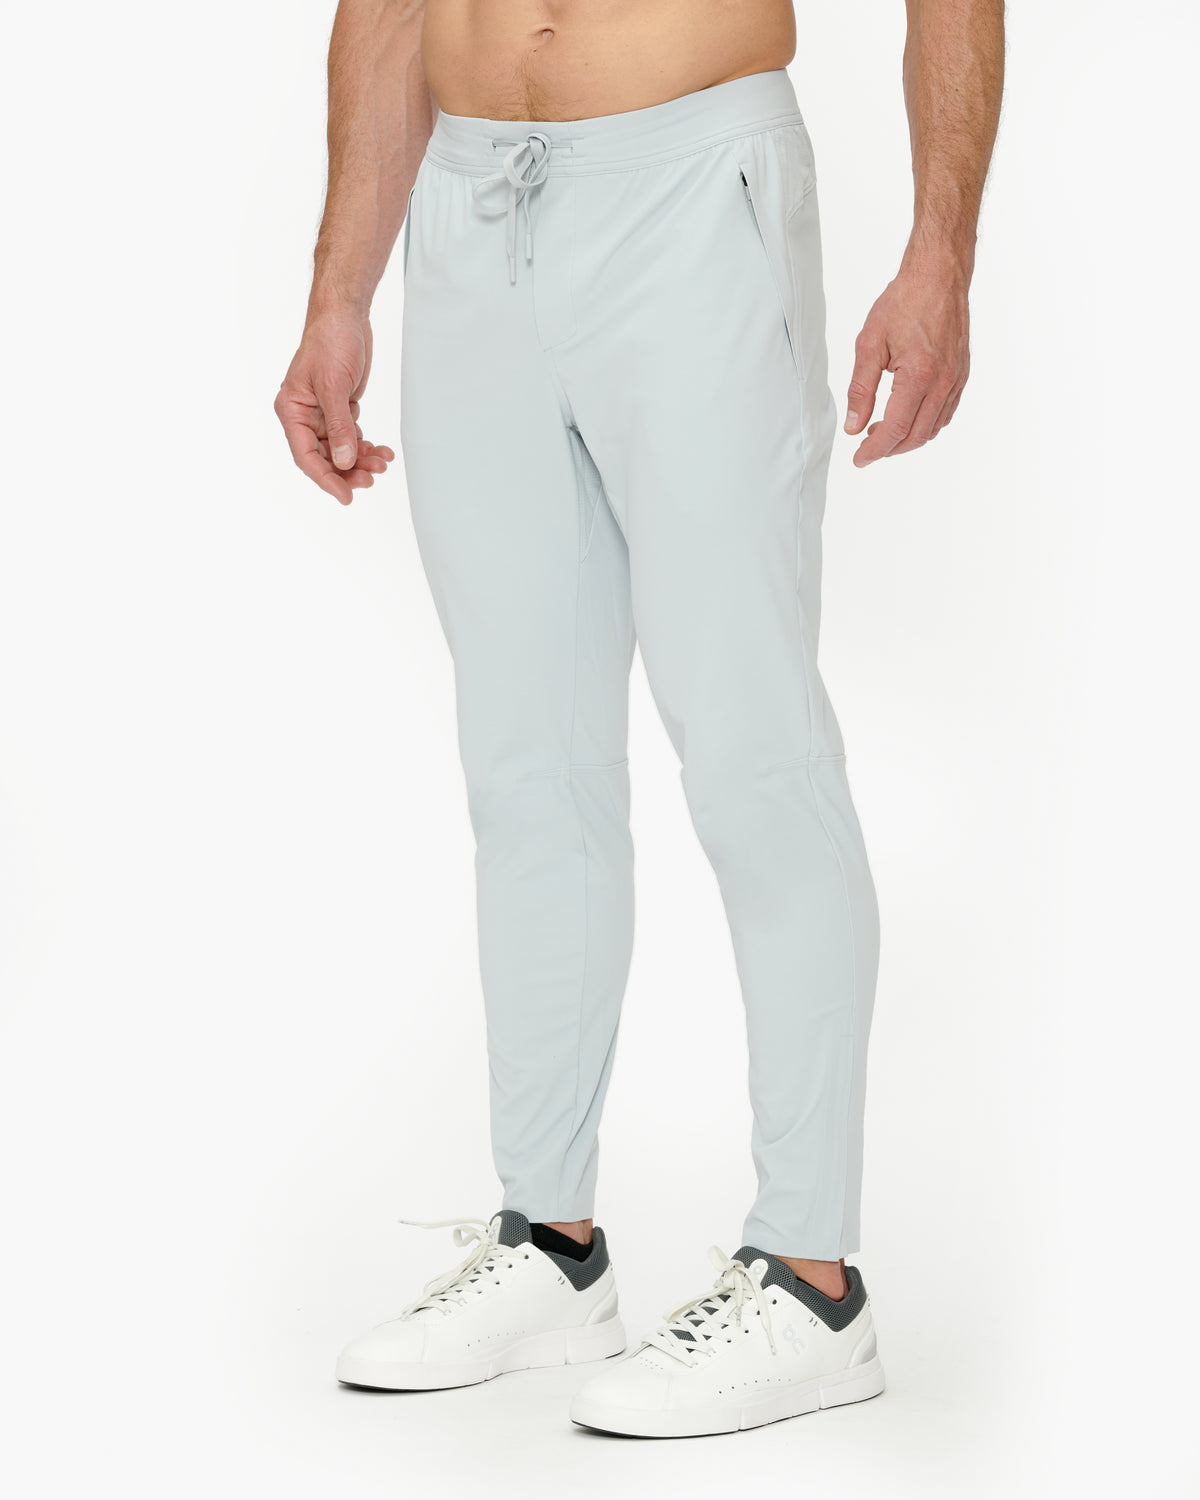 Kyodan light weight, day to day sweatpants for joggers